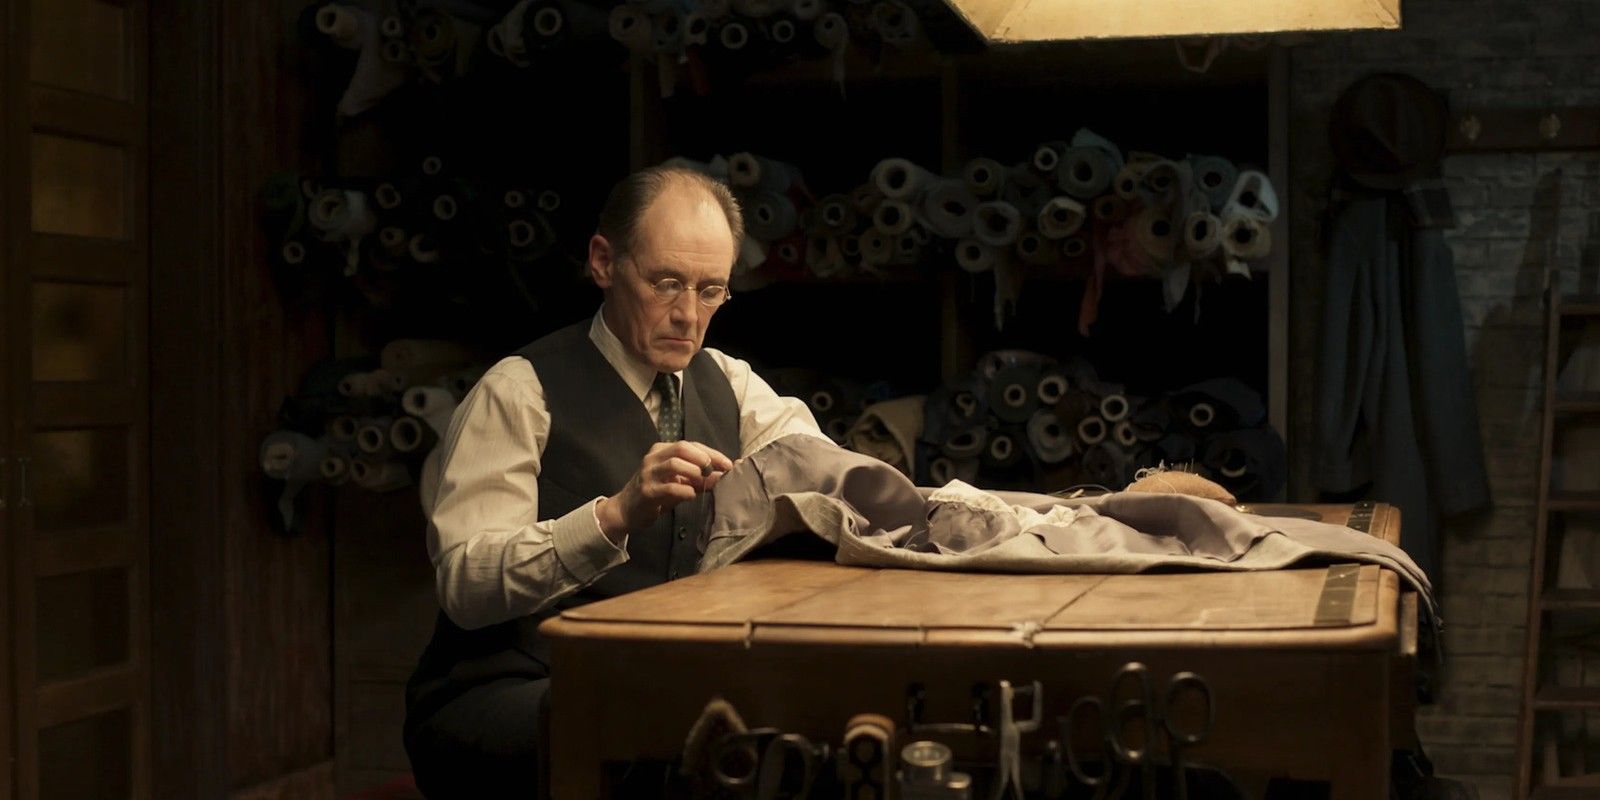 Leonard sewing on his table in The Outfit